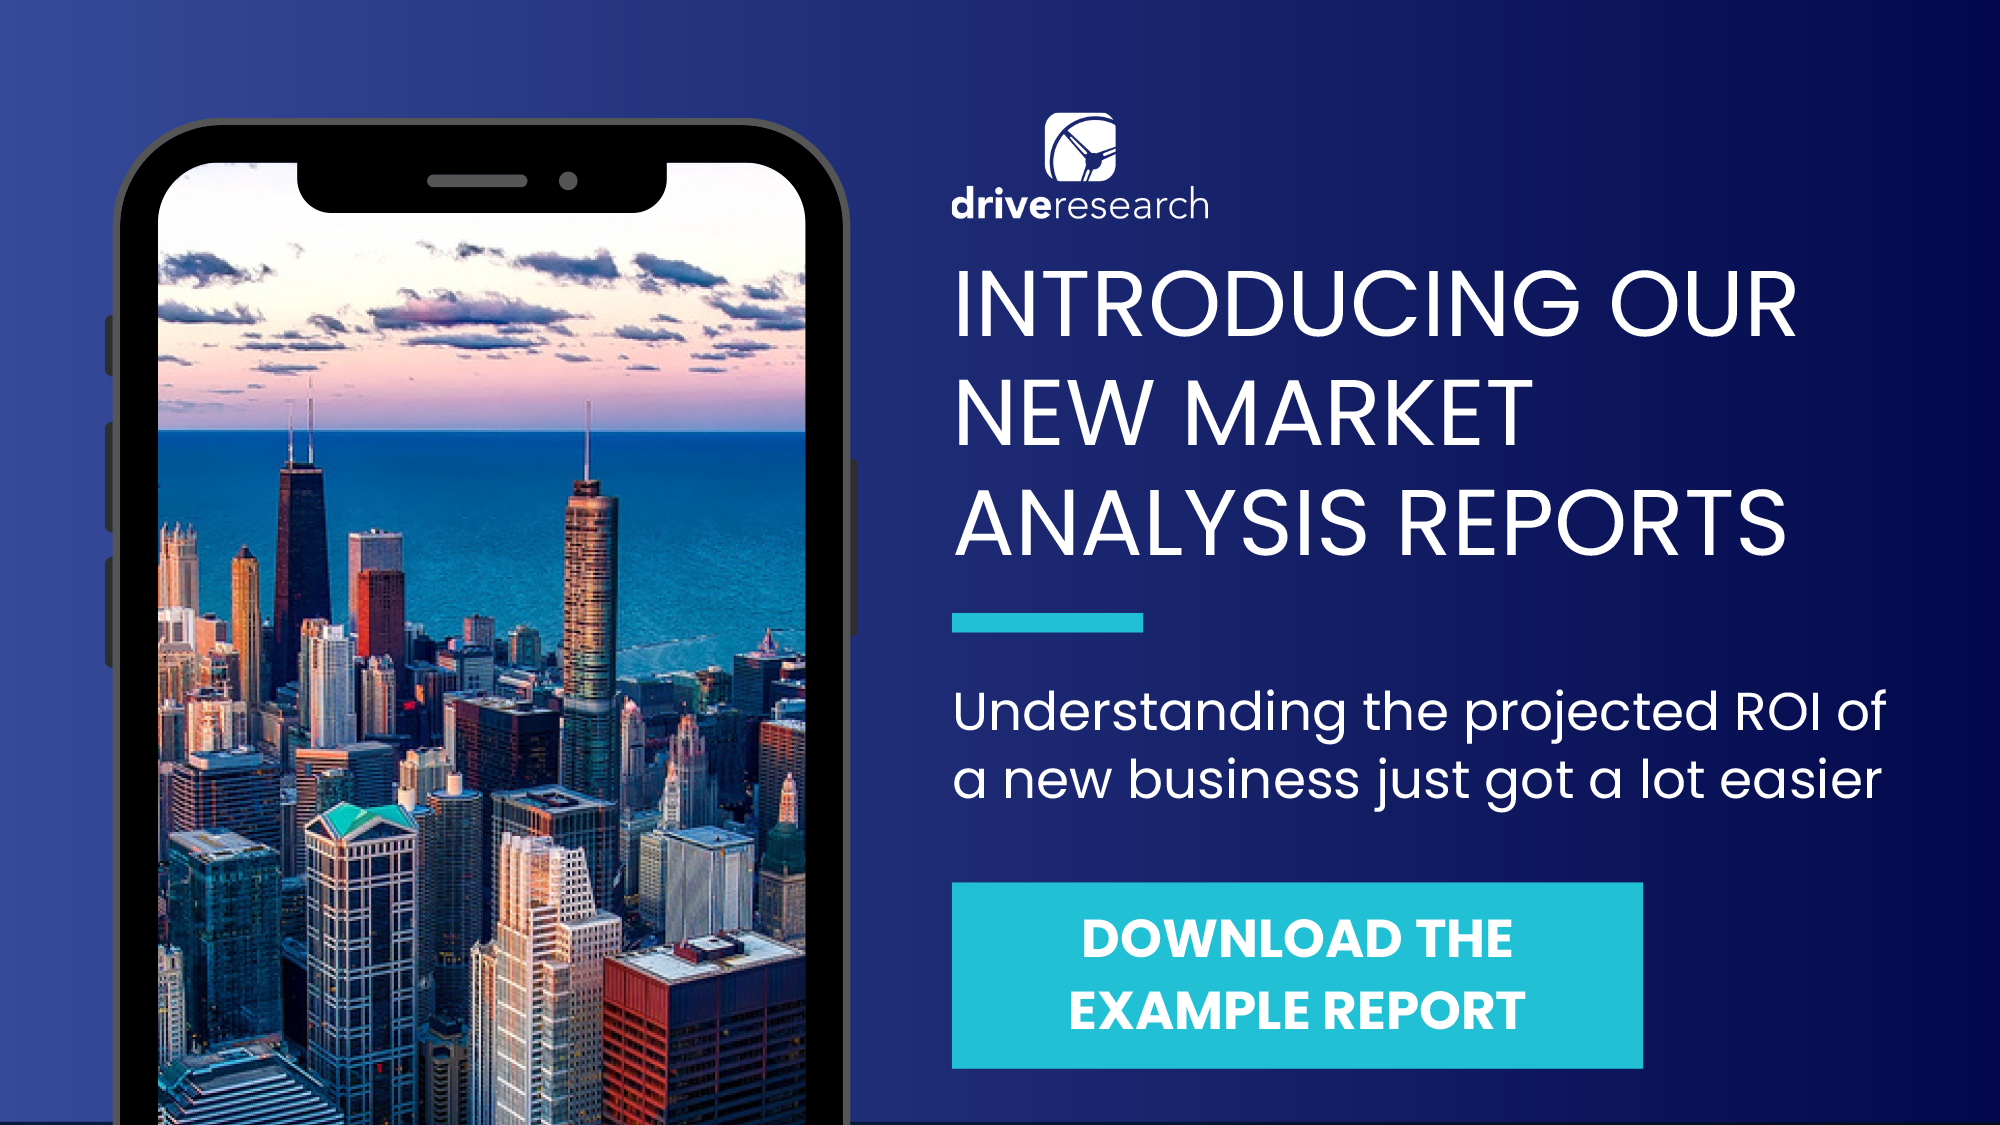 Market analysis report download call to action